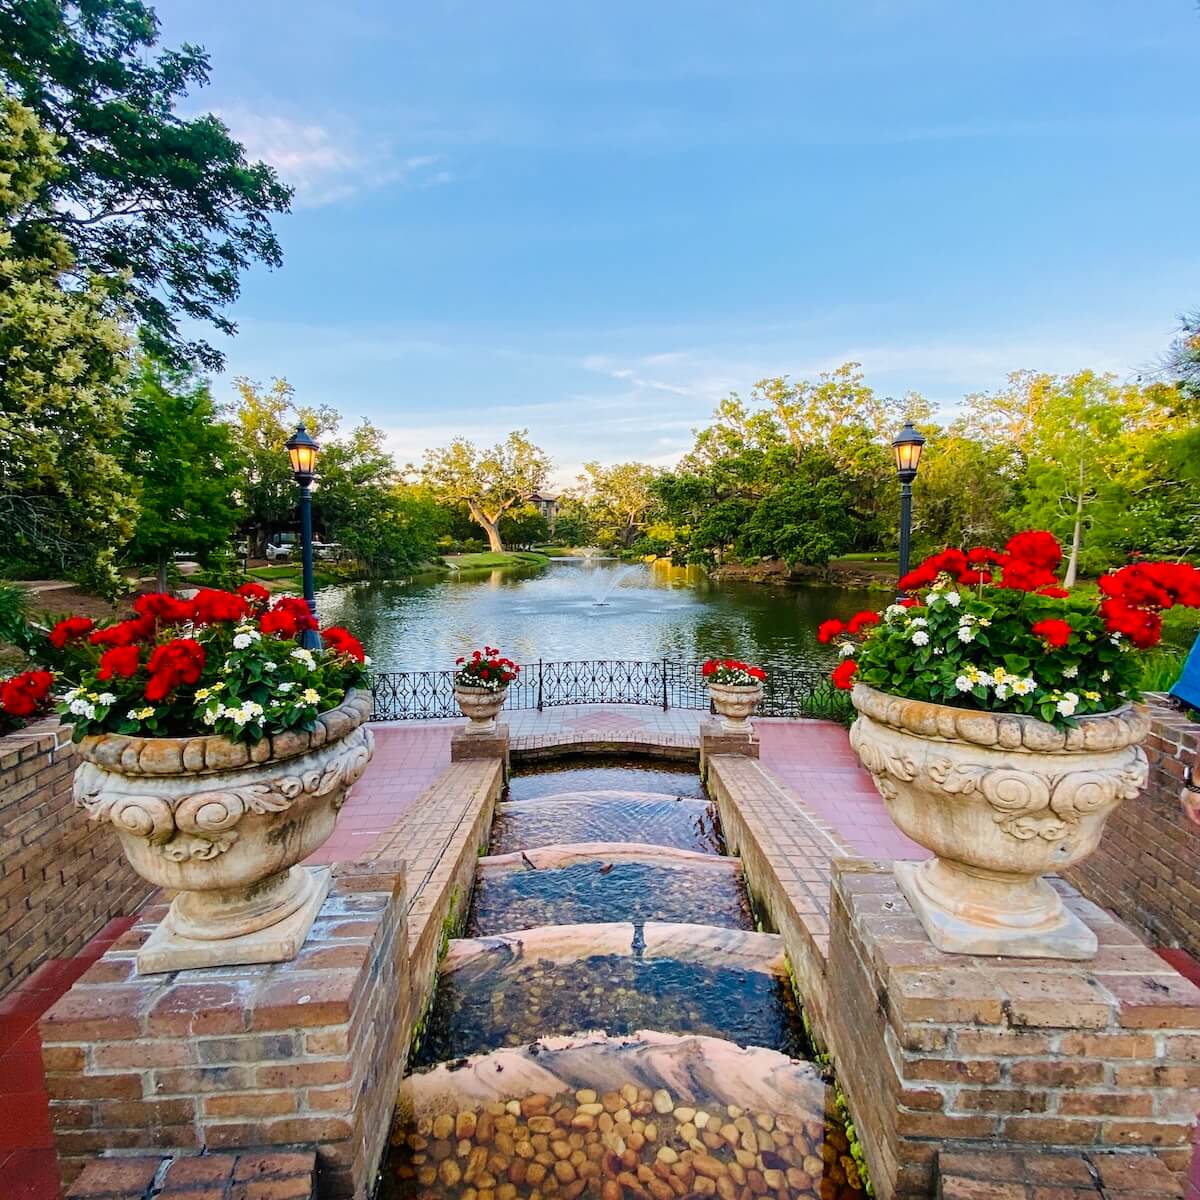 Gardens and reflecting pool with red blooms